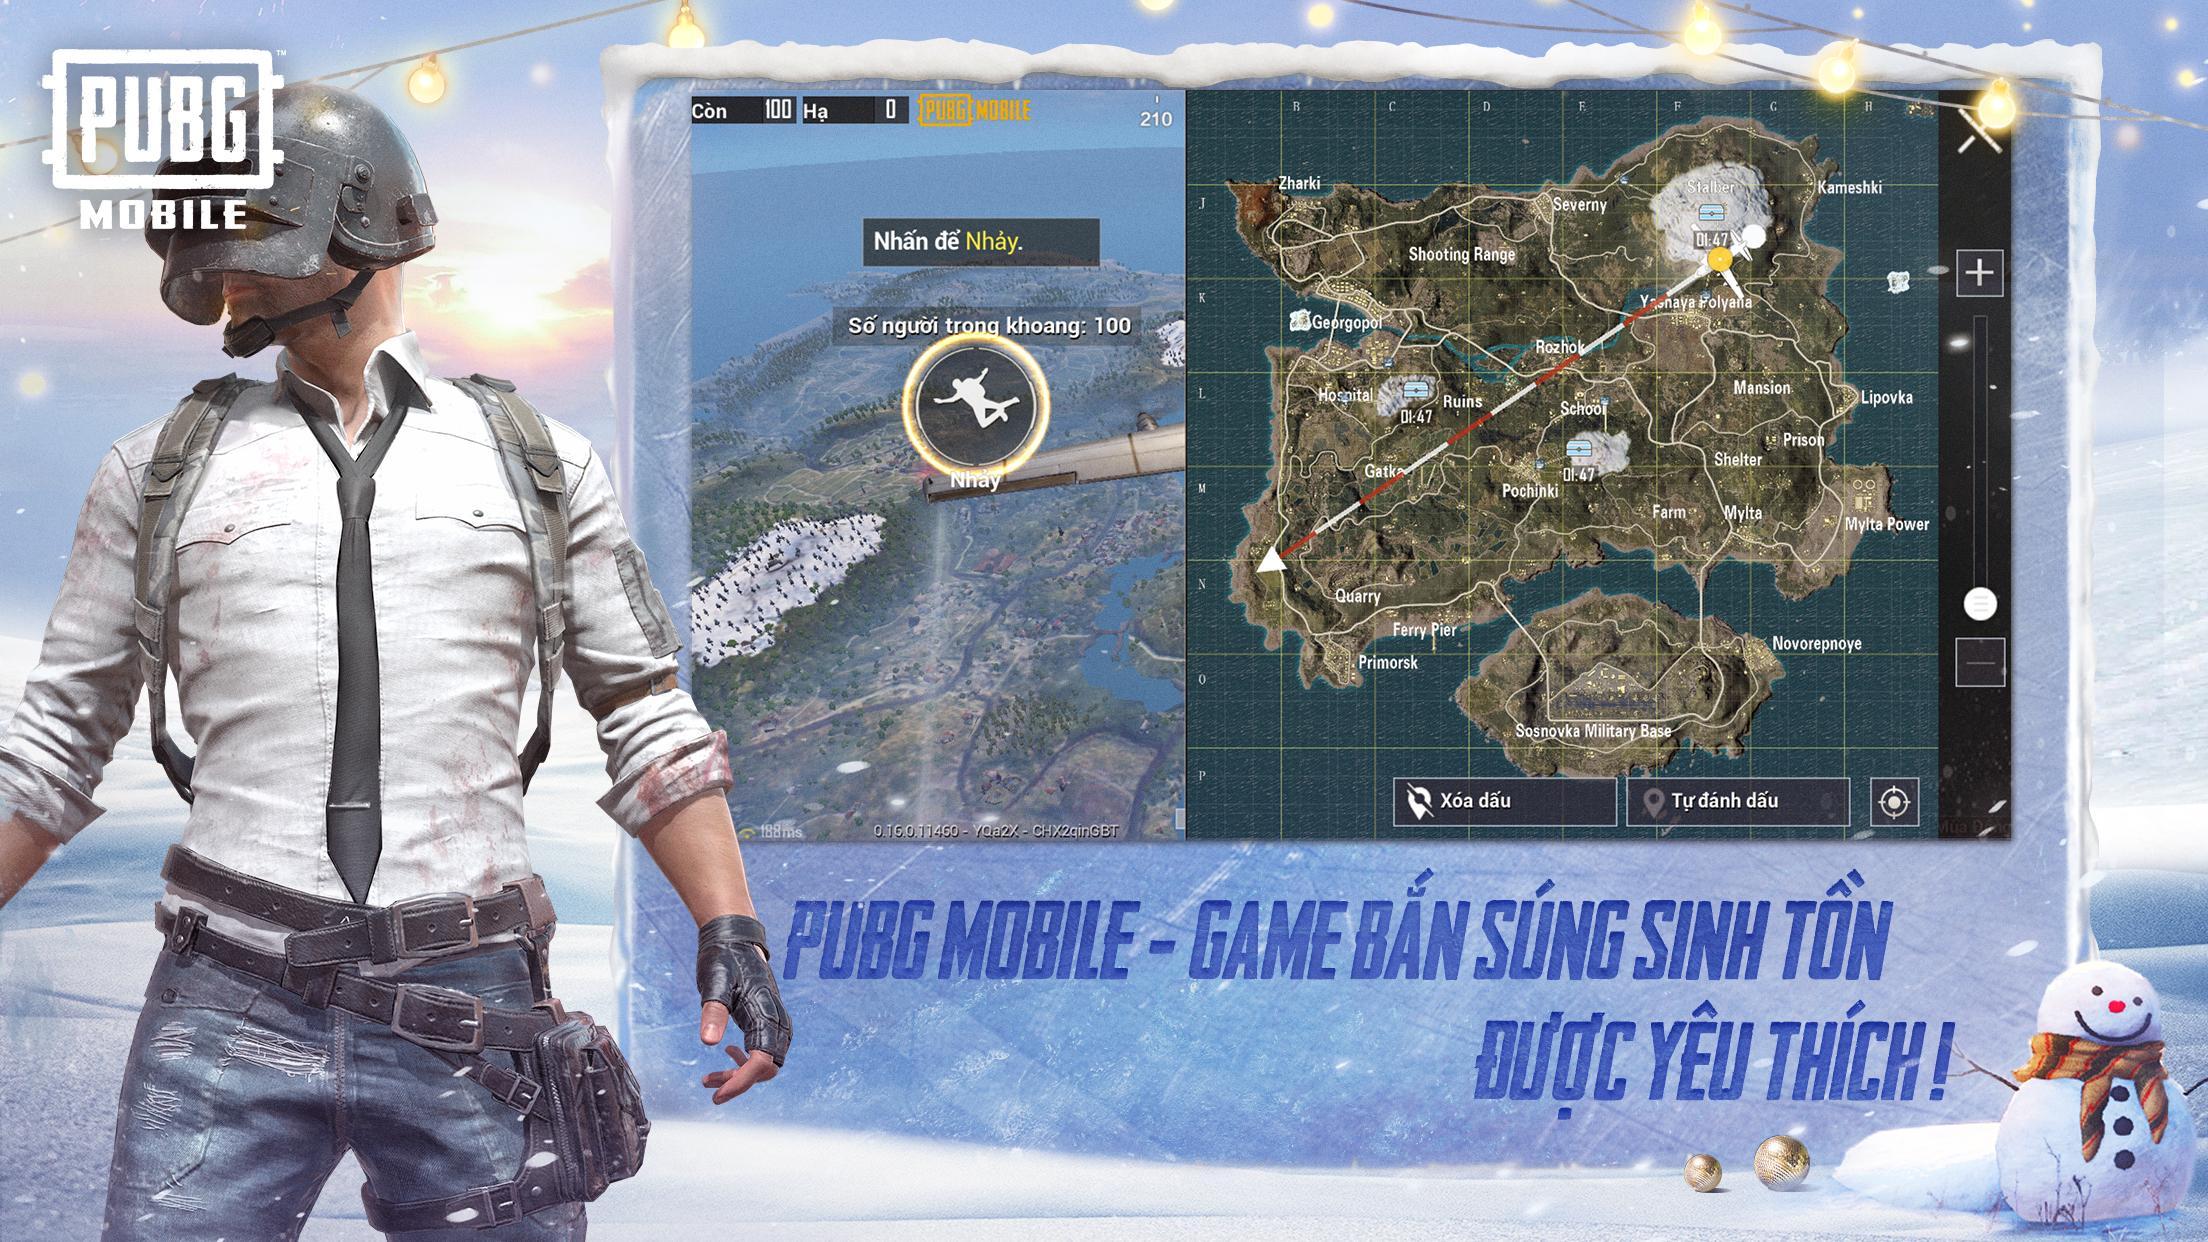 Beta pubg download android фото 94